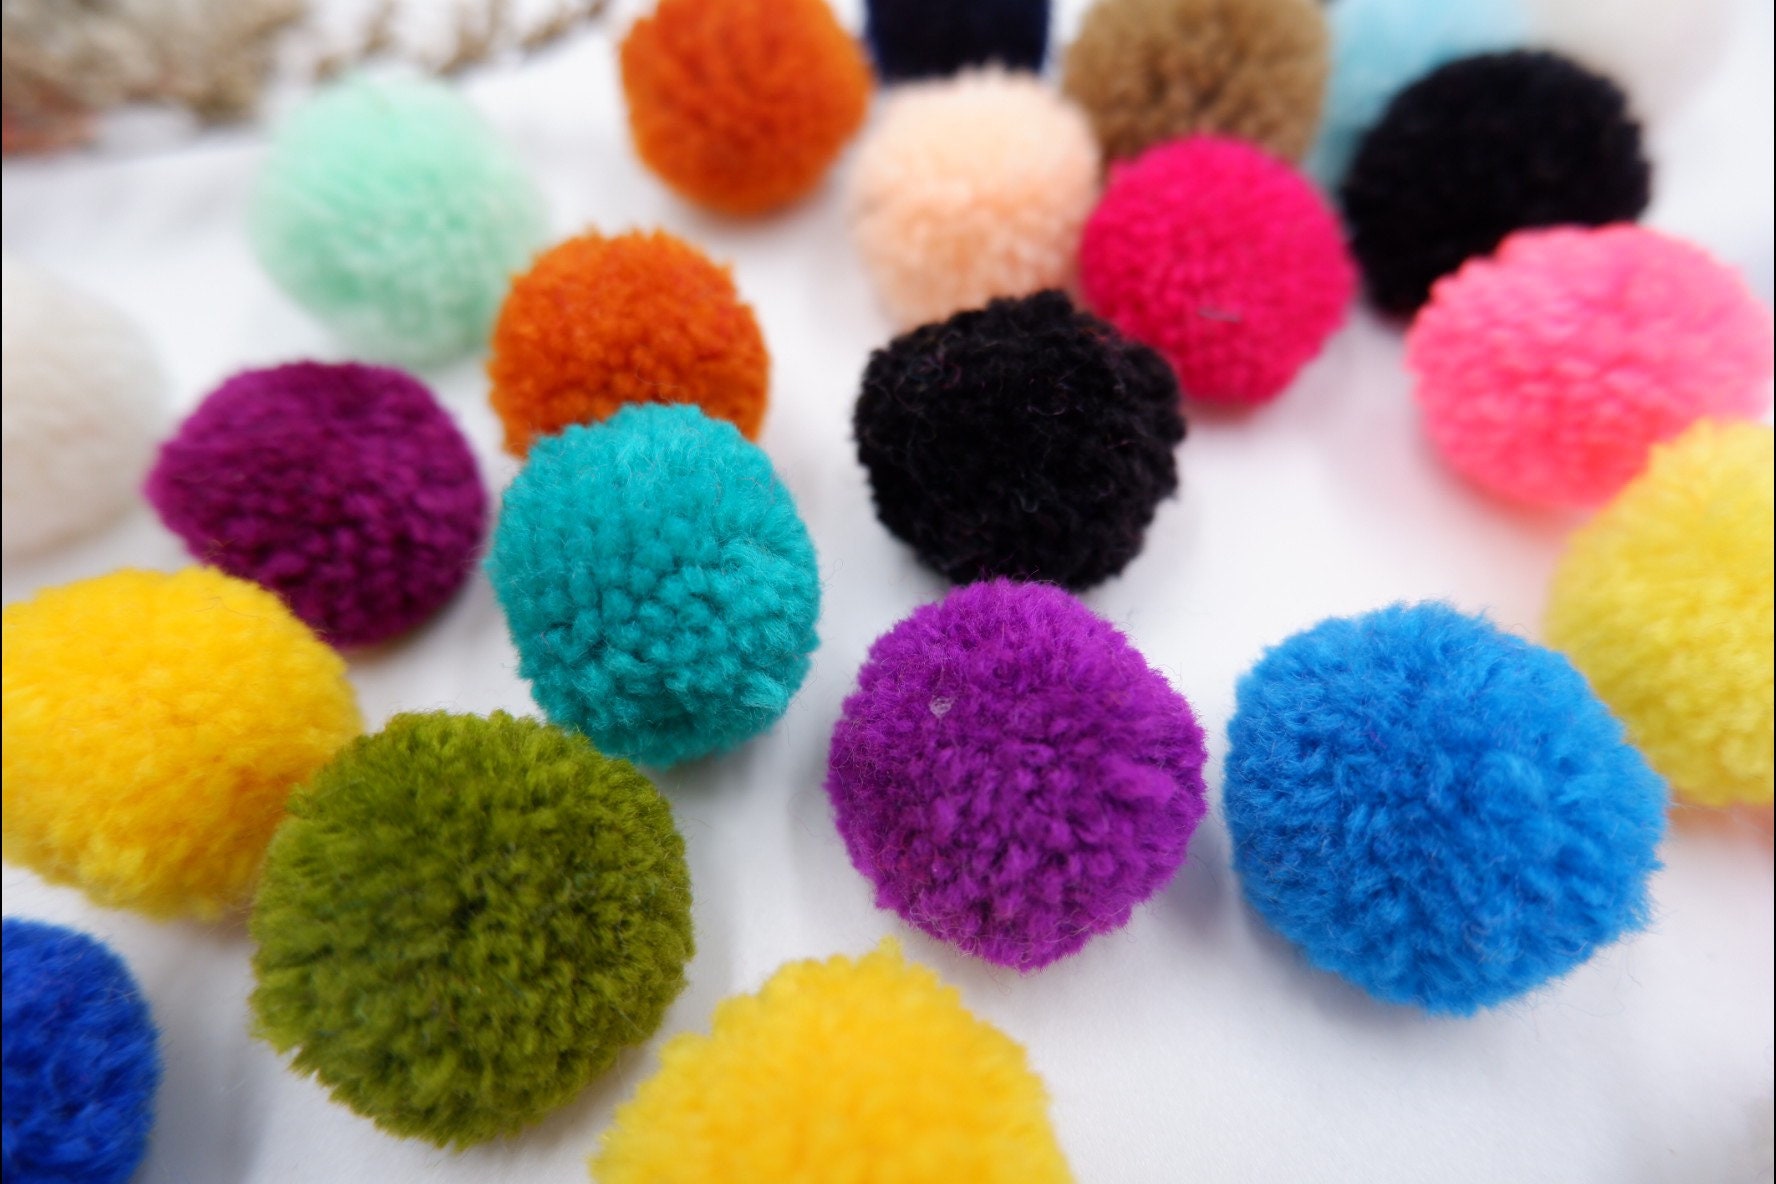 20 Pcs Large Yarn Pom Poms-2 Inch Made to Order Acrylic Yarn Balls for Hats  Or Party Decorations-DIY Craft Pompoms (Mixed, 2ich)